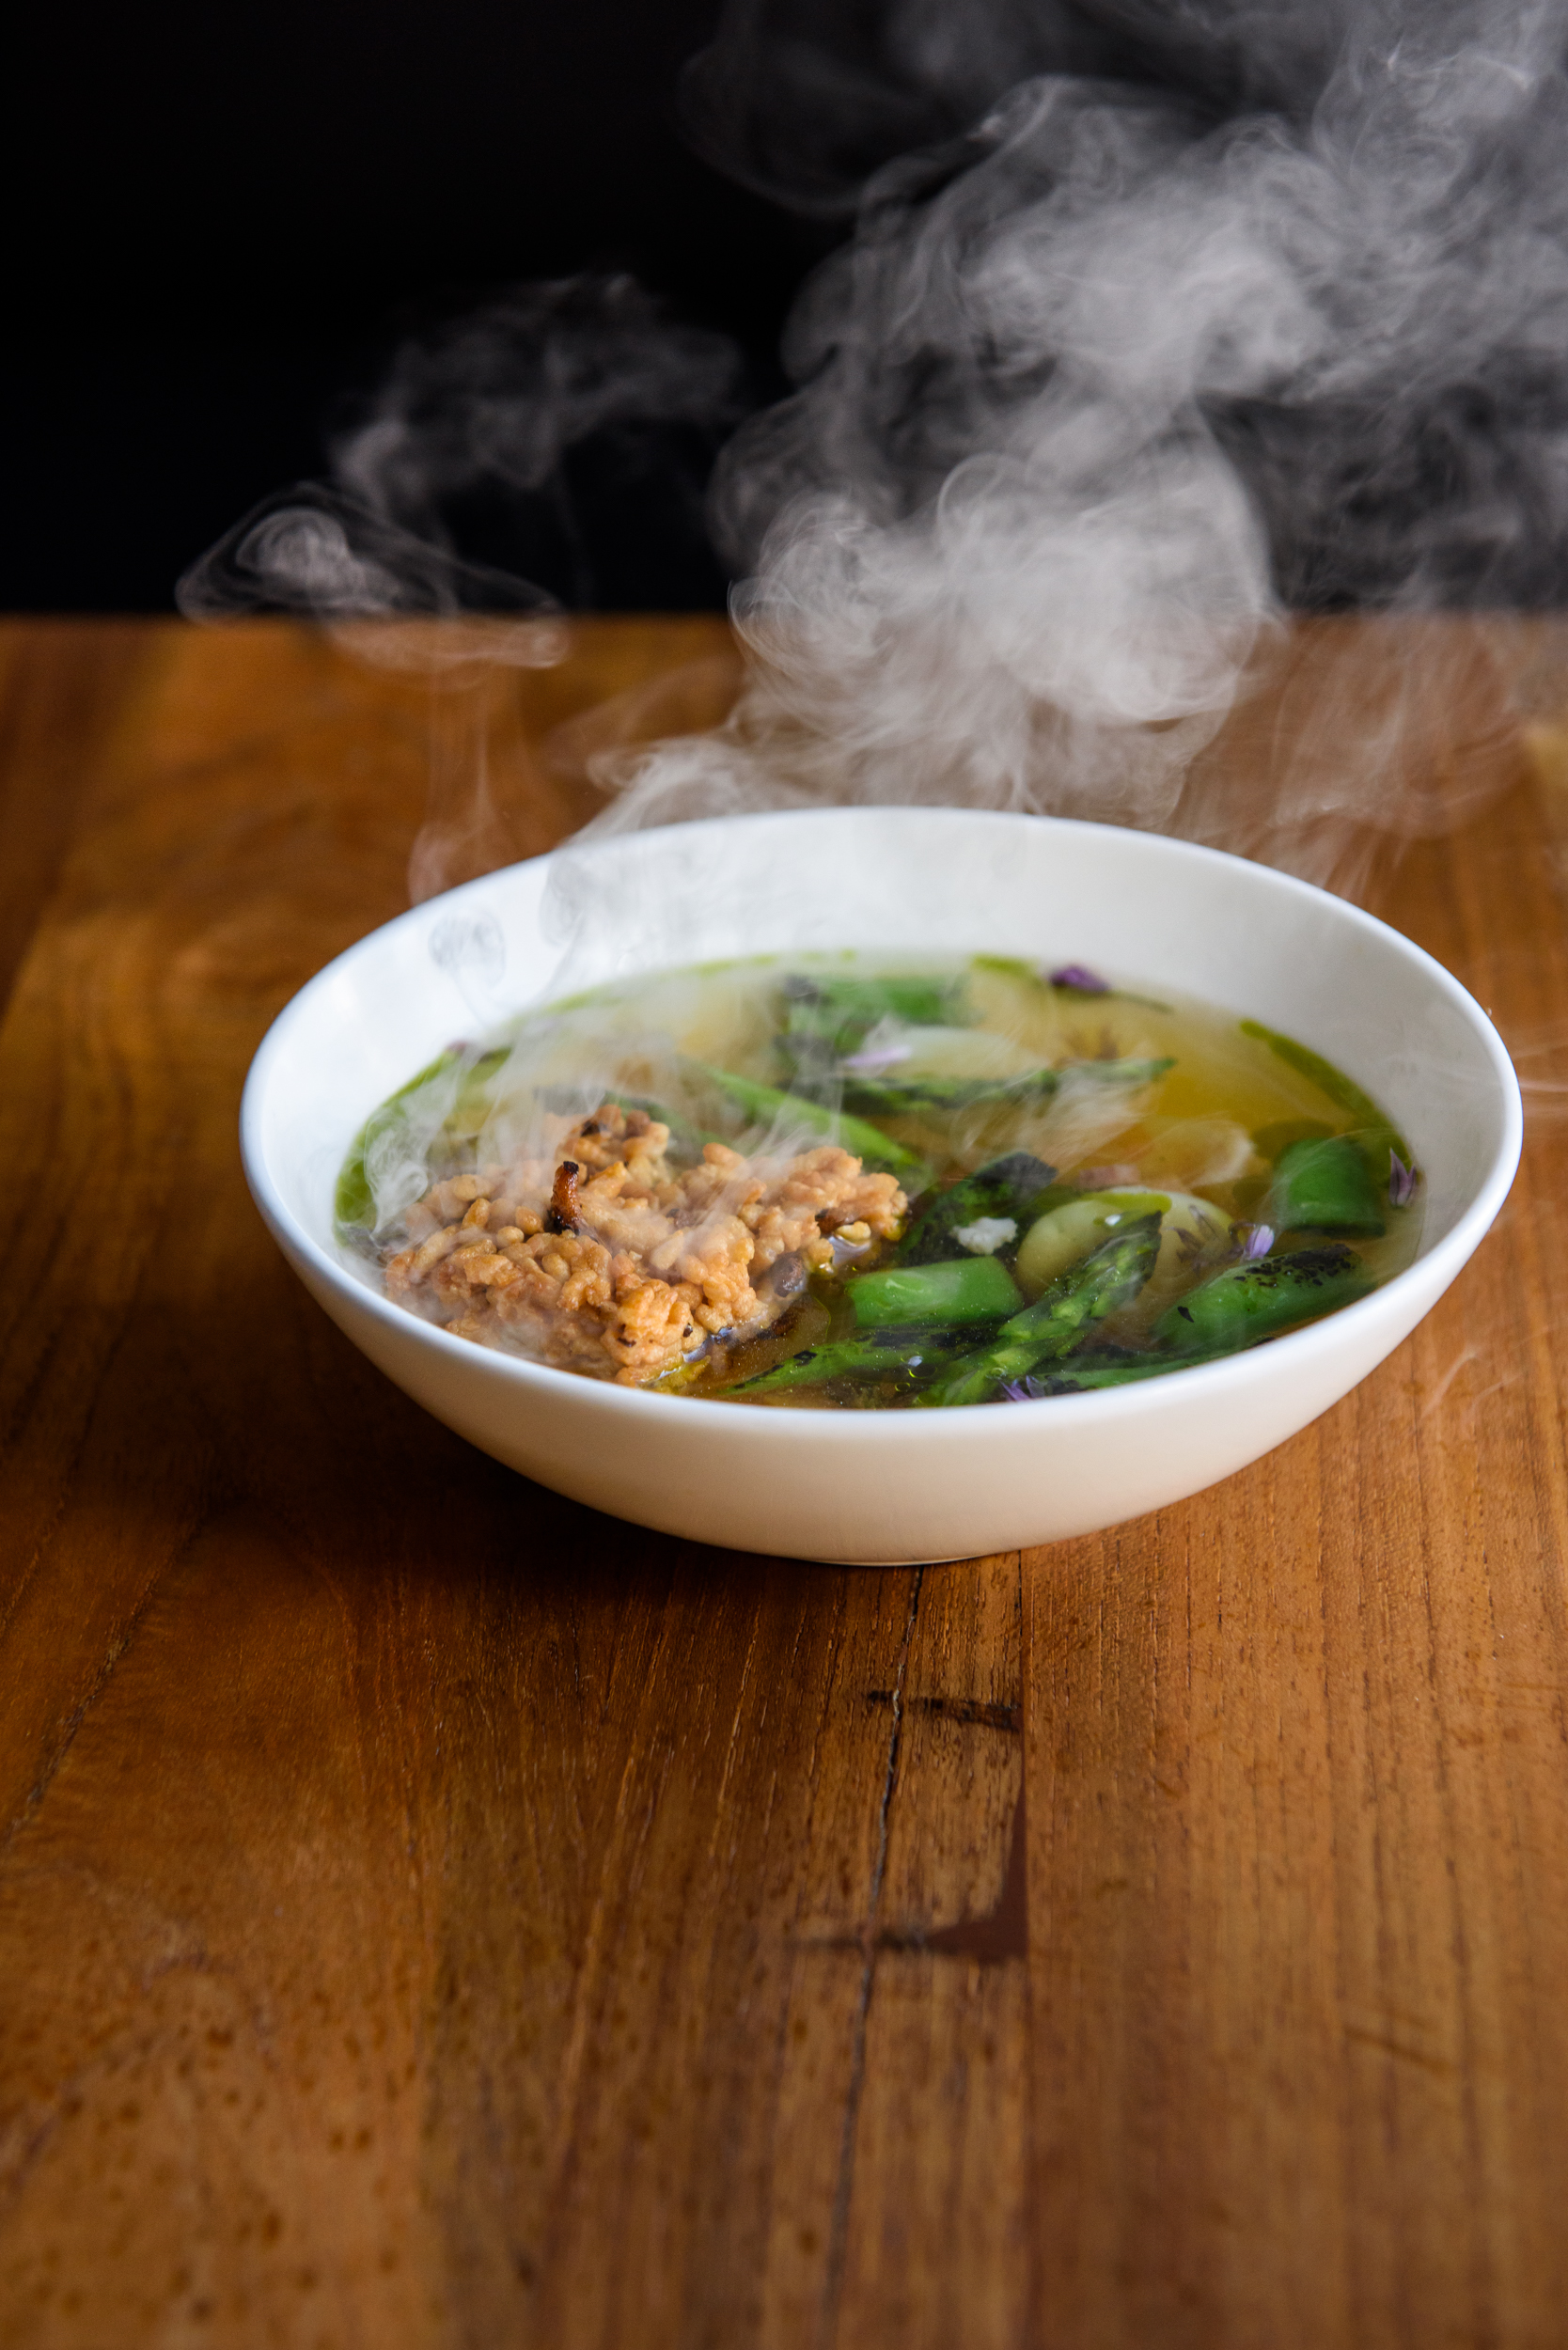 Chef Brandon Jew: Redefining Chinese-American Cuisine, One Sizzling Rice Soup at a Time